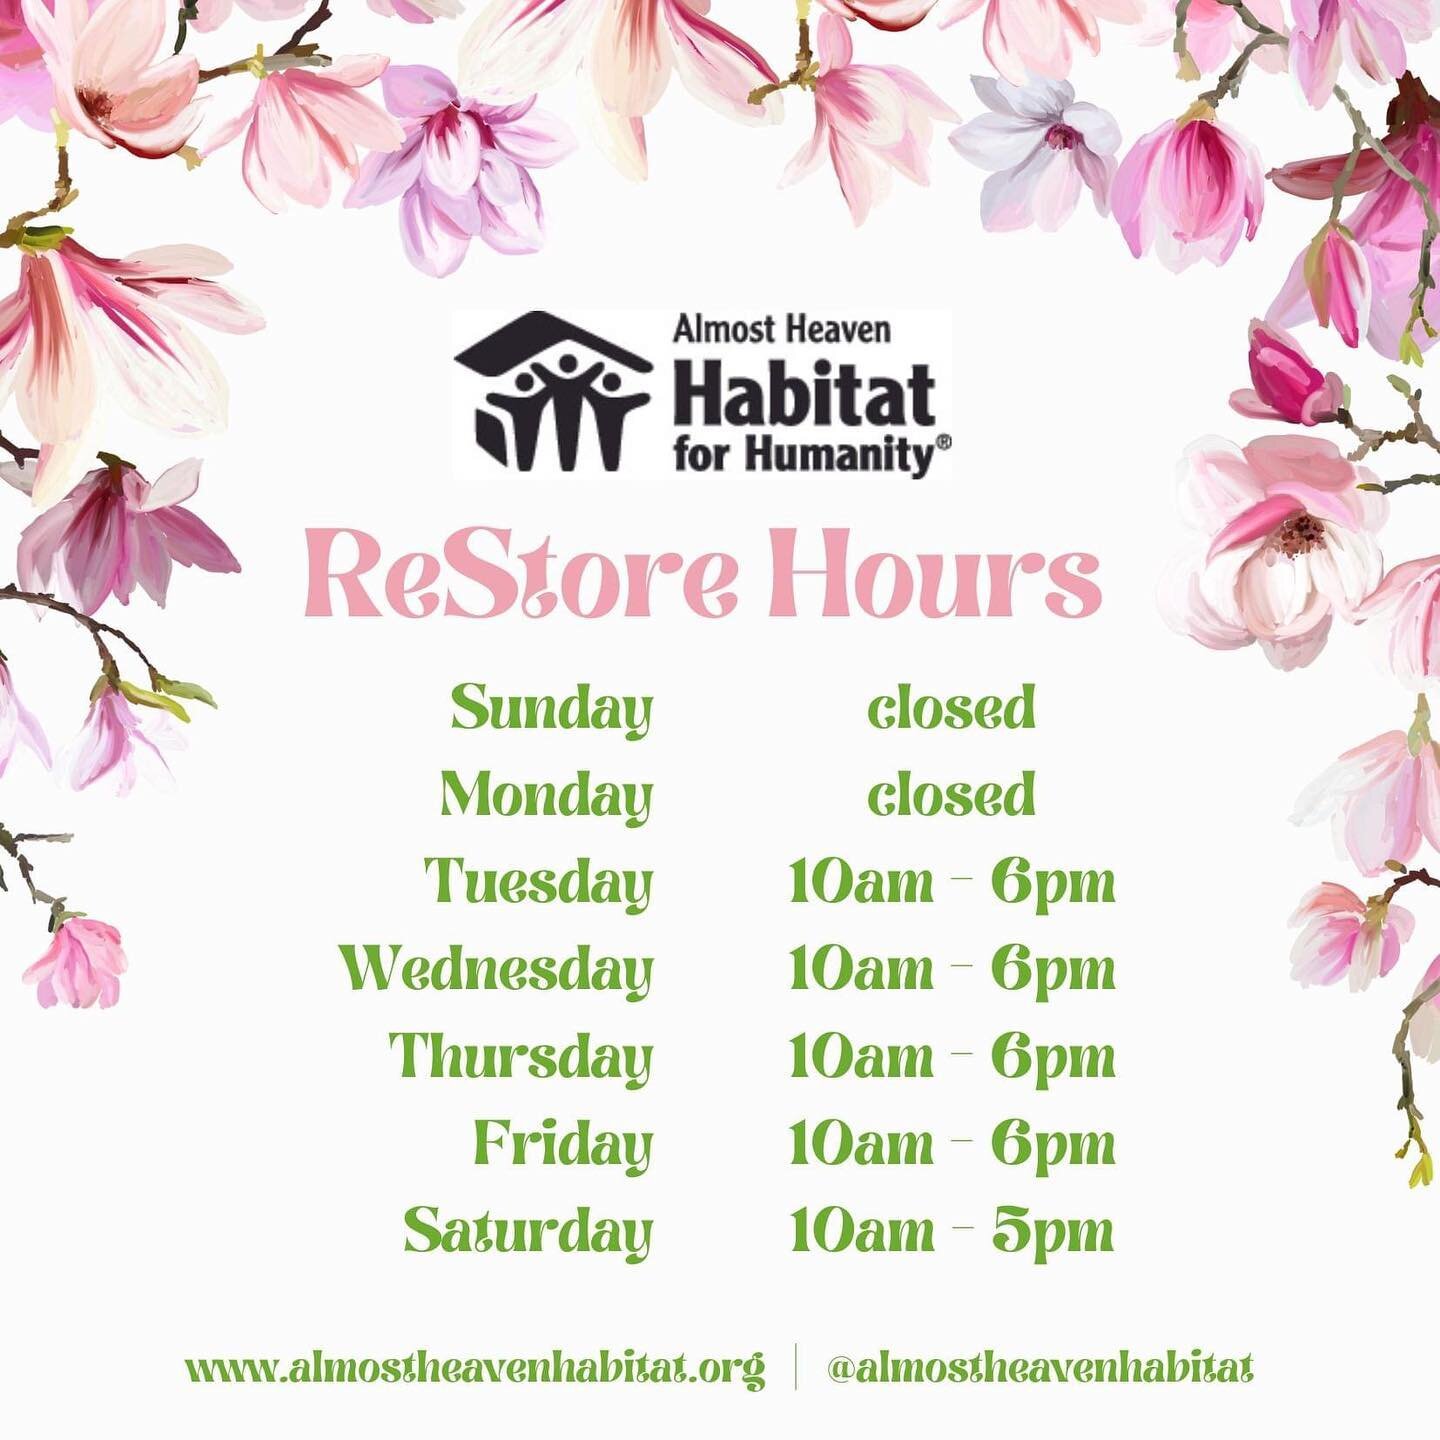 reduce, reuse, recycle, renew at the ReStore! 🌸

Now Open T-F 10a-6p &amp; Sat. 10a-5p